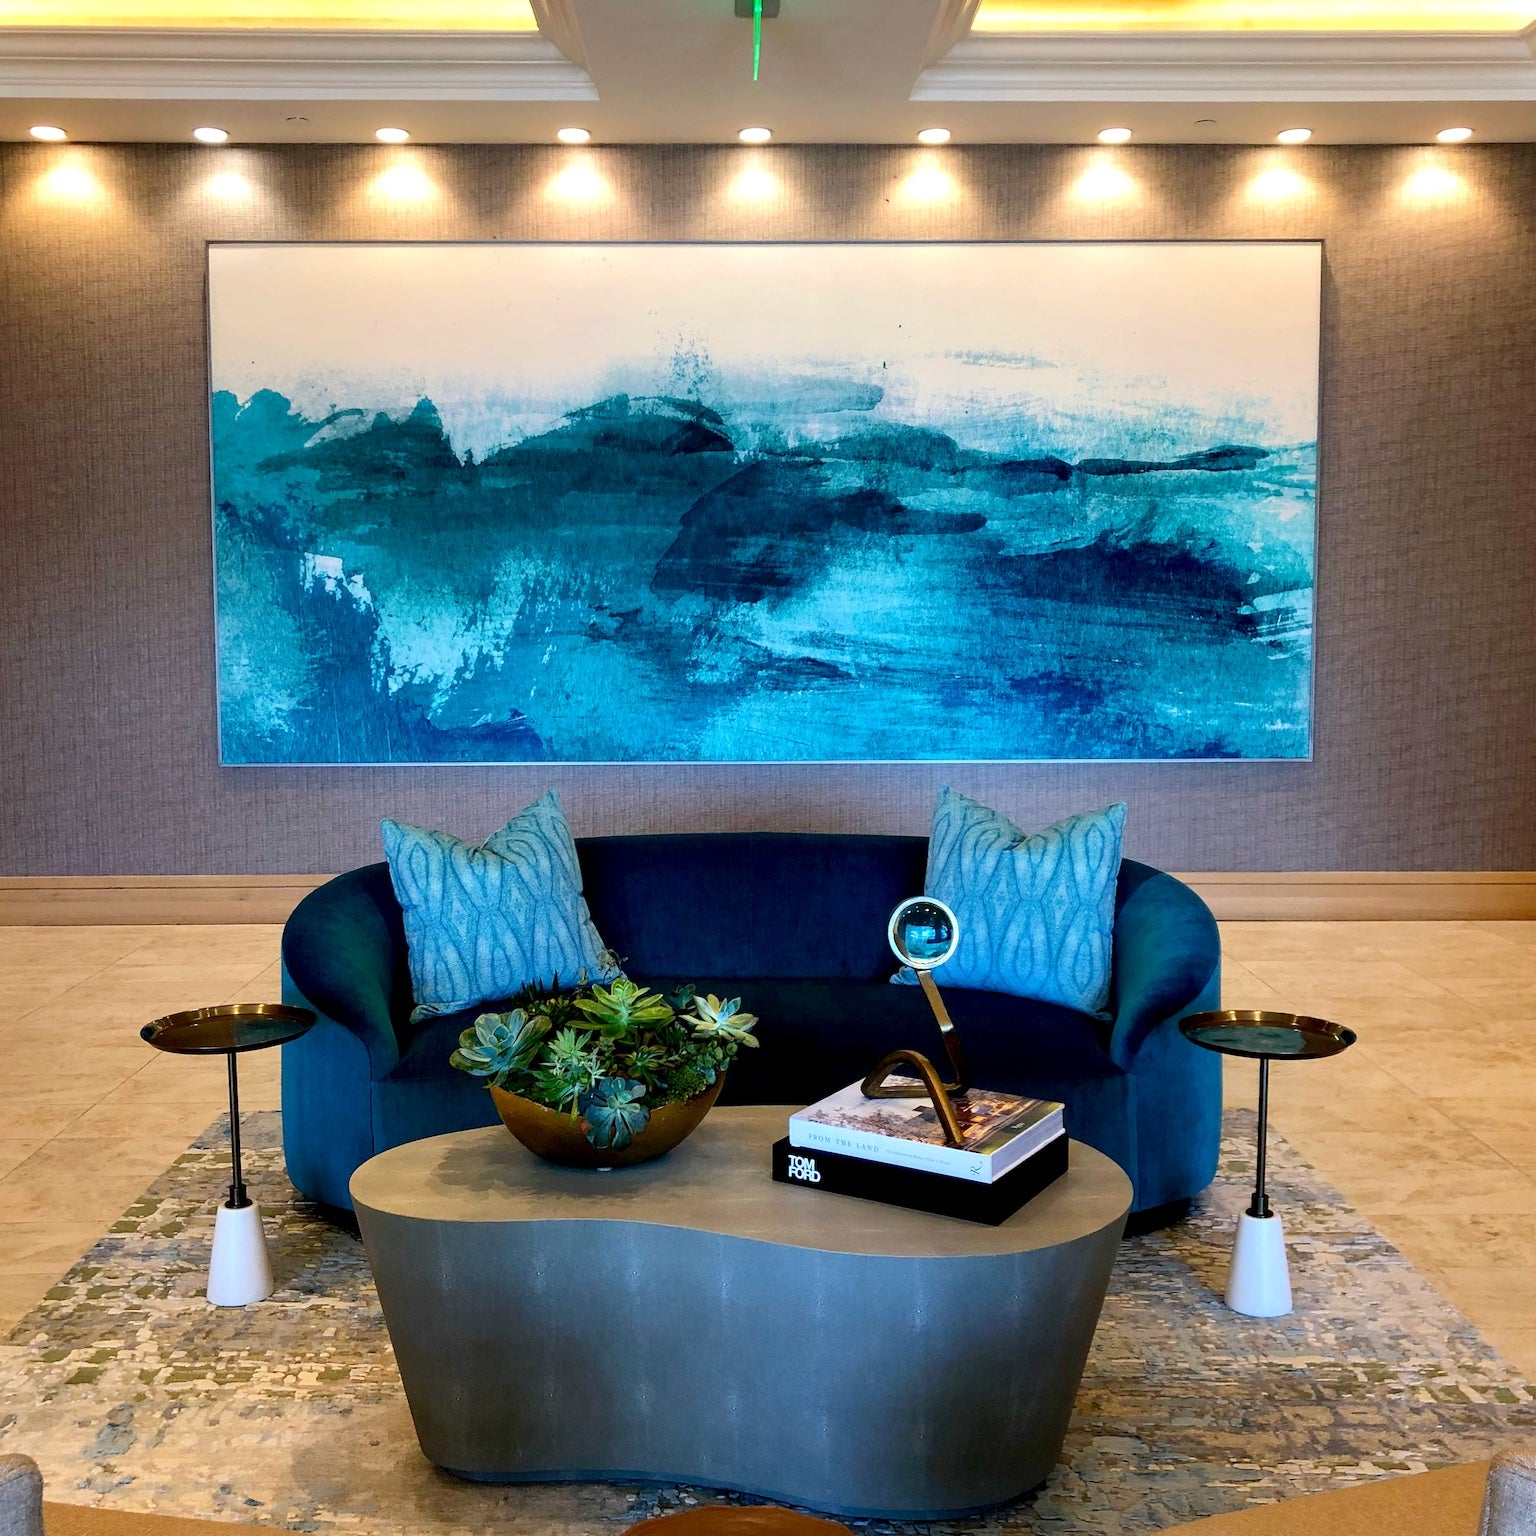 Upscale reception area at 1221 Avenue enhanced by WRAPPED Studio's custom oceanic artwork, capturing the serene energy of the sea with its vivid blue color palette.